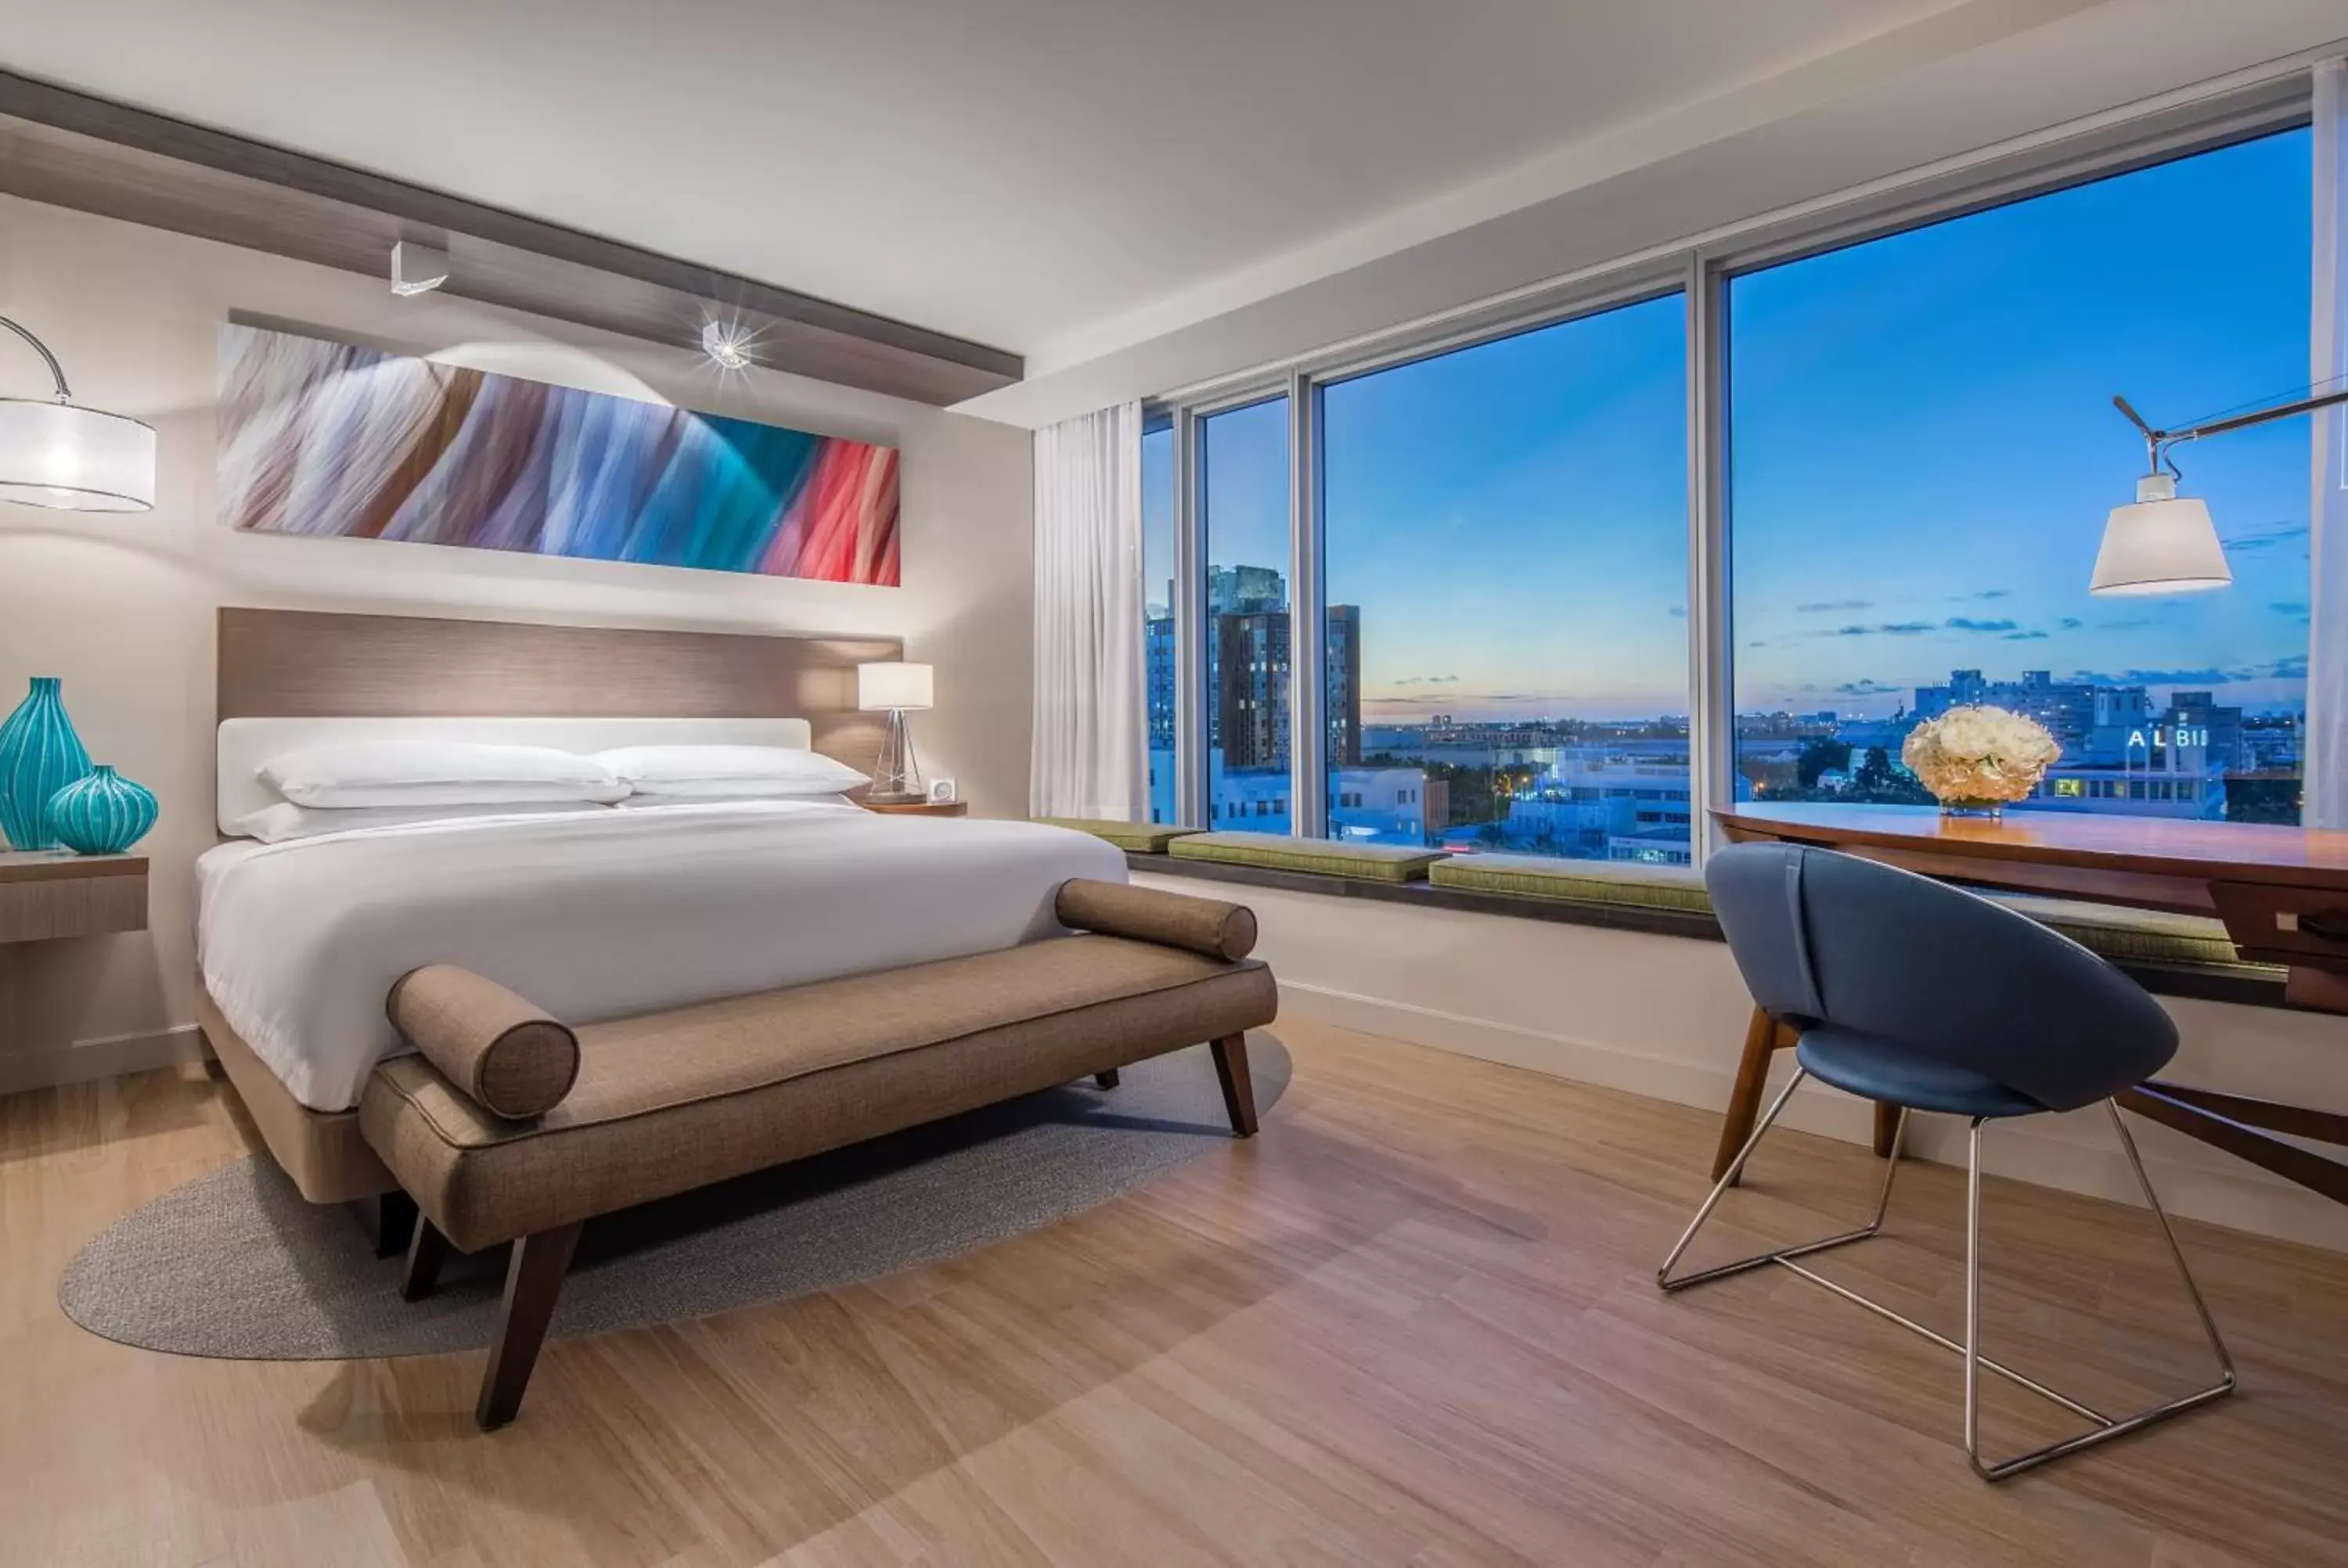 King Room with City View in Hyatt Centric South Beach Miami